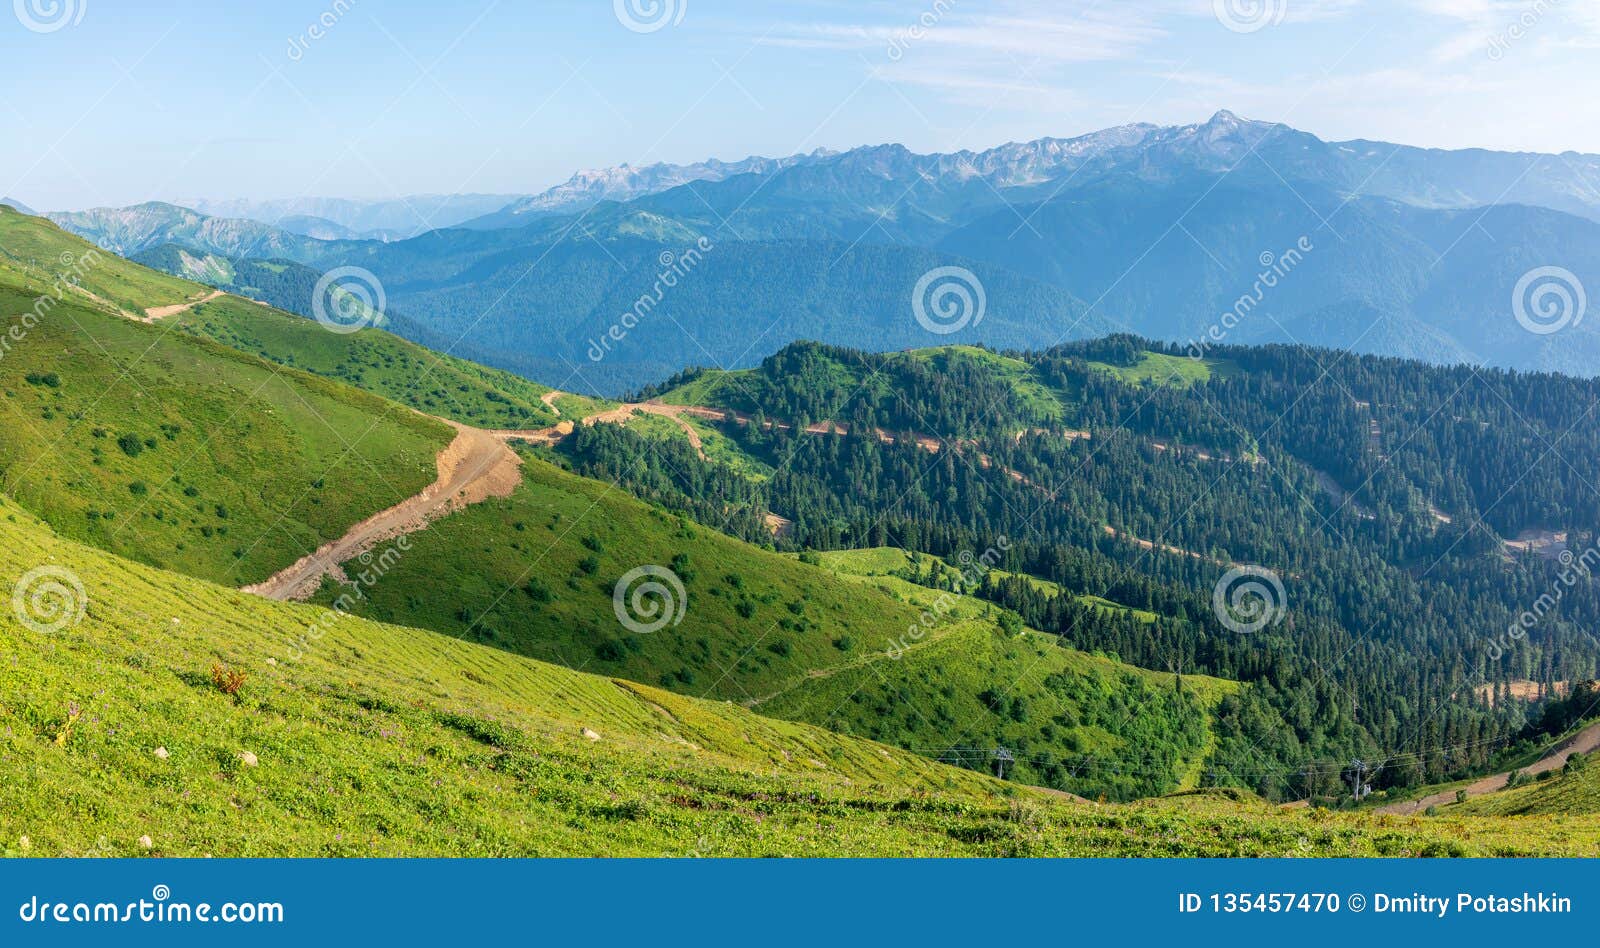 The View From The Height Of A Green Mountain Valley With Residential